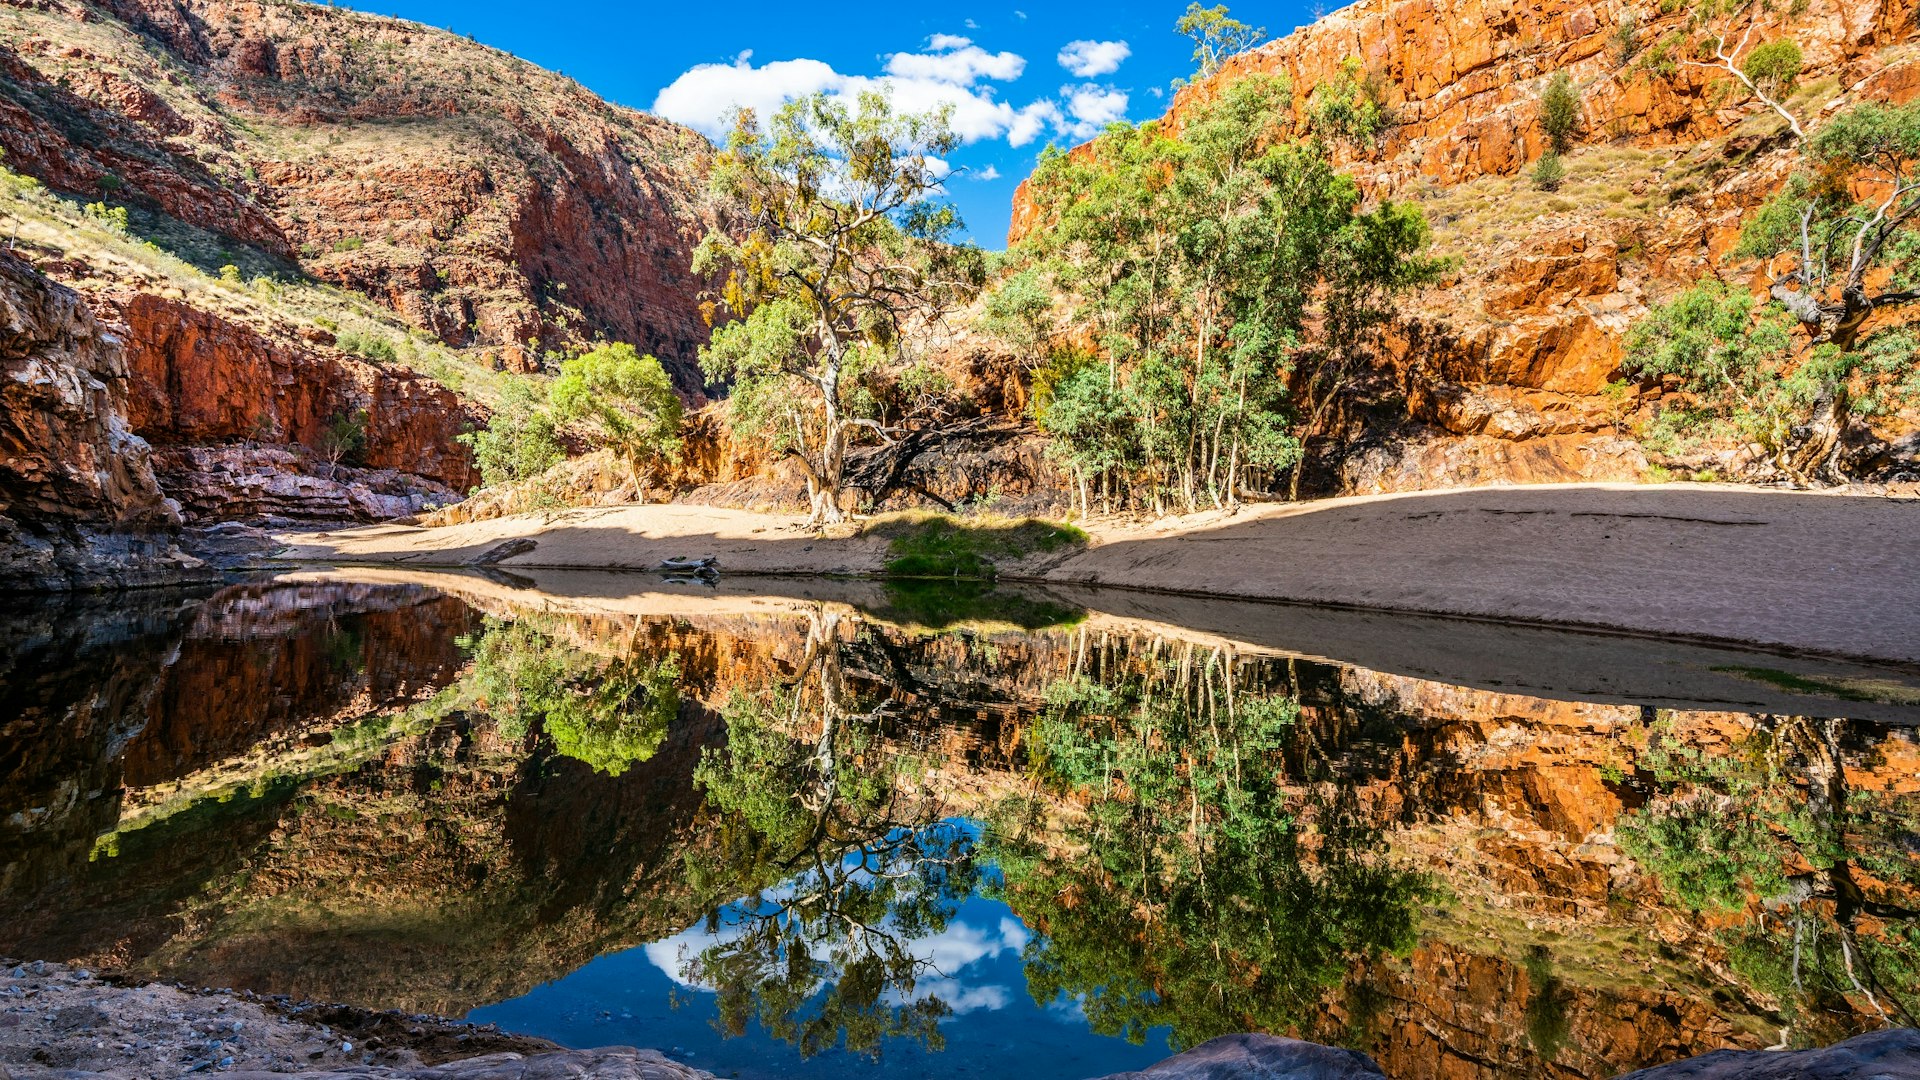 Ormiston gorge water hole in the West MacDonnell Ranges, Northern Territory; rec cliffs fringed with green grasses loom over a few trees and a waterhole, which reflects the scene and the blue sky above